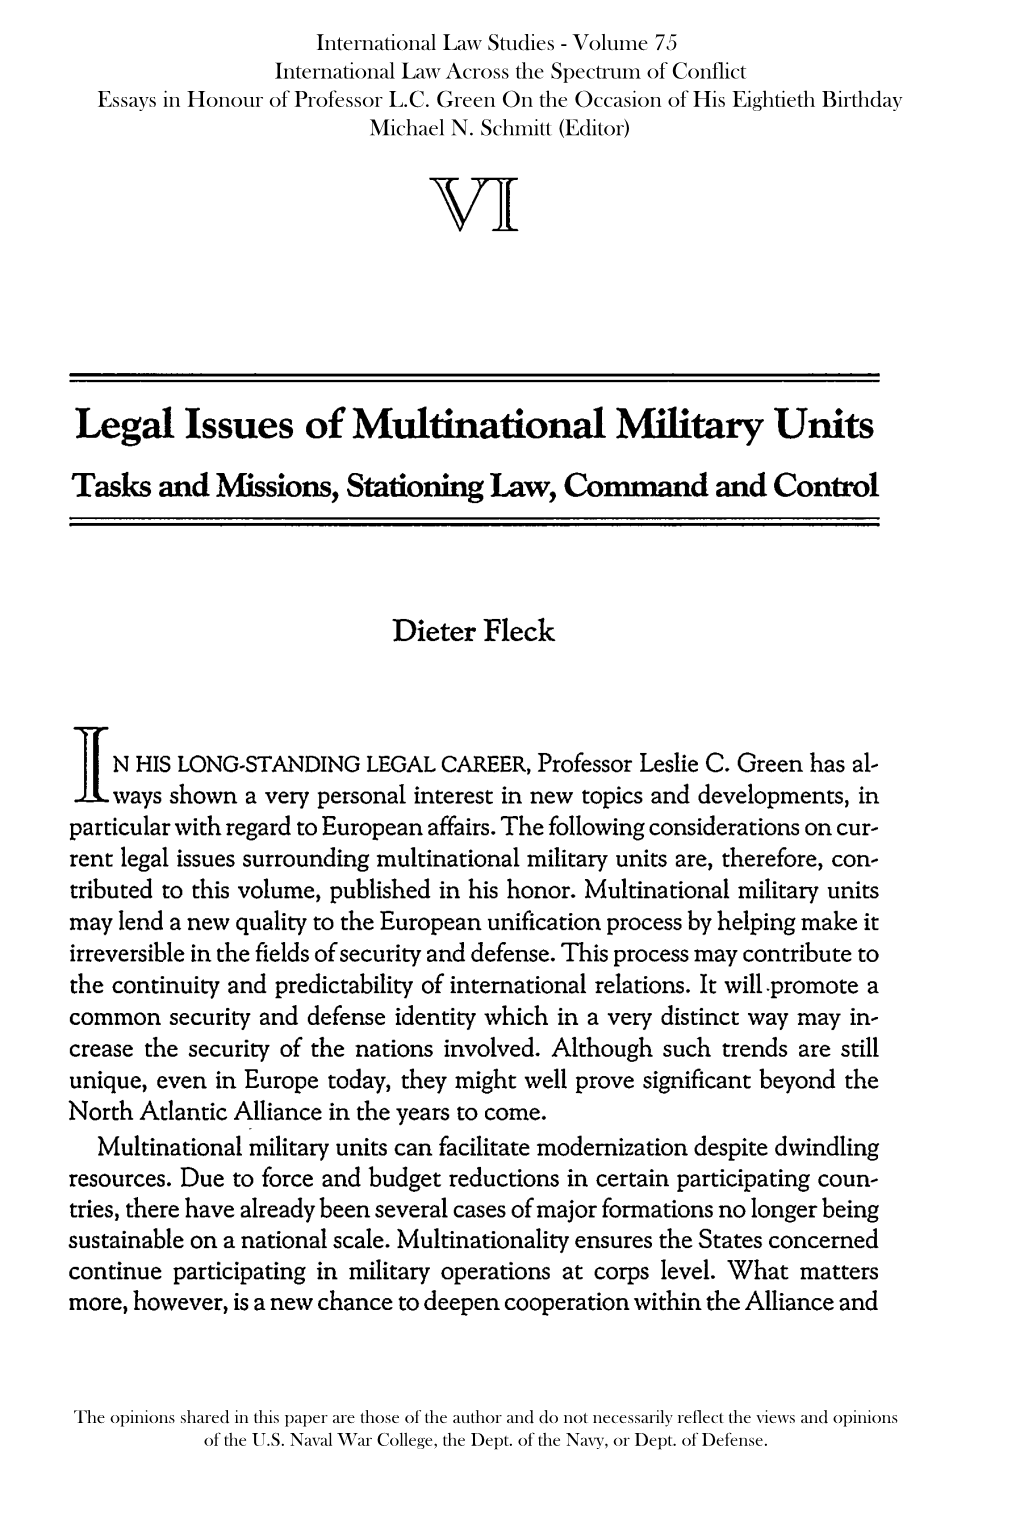 Legal Issues of Multinational Military Units Tasks and Missions, Stationing Law, Command and Control